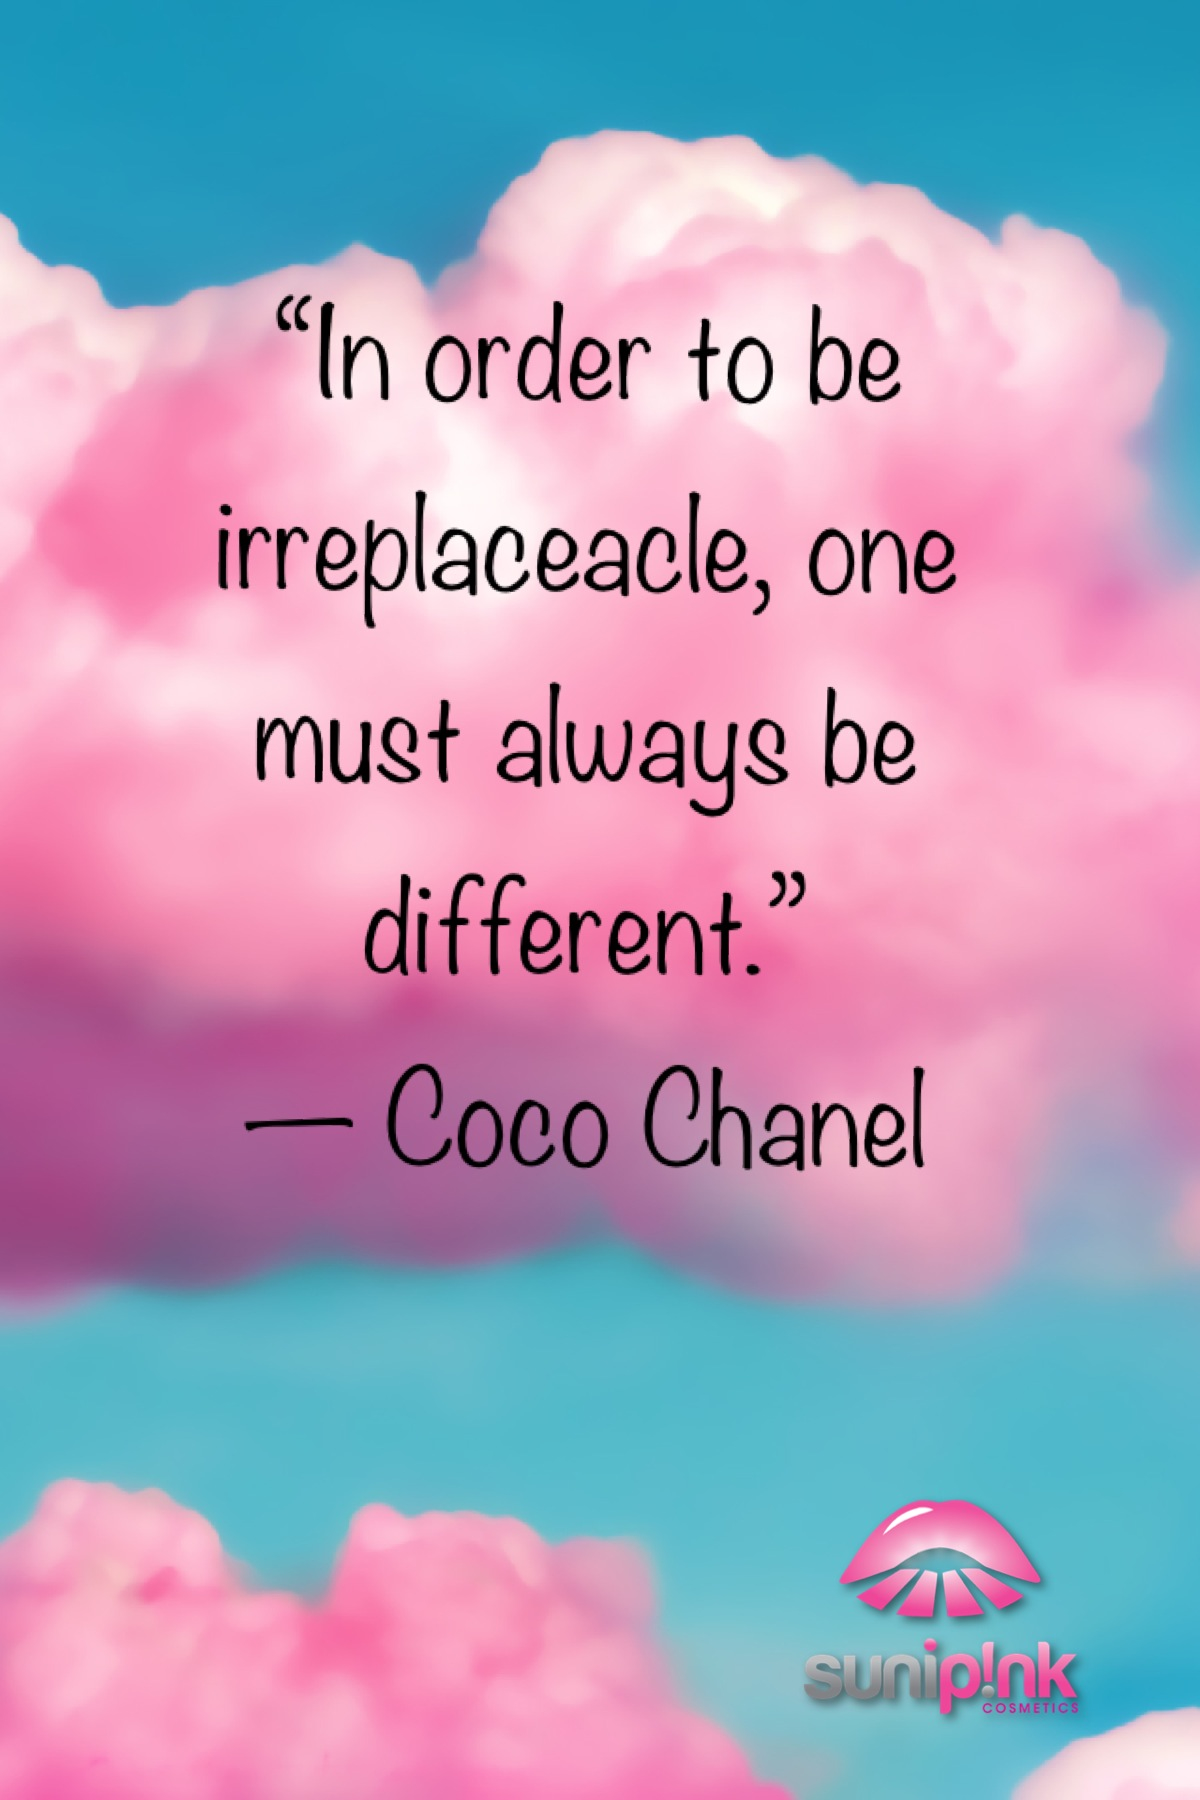 In order to be irreplaceable, one must always be different. Coco Chanel